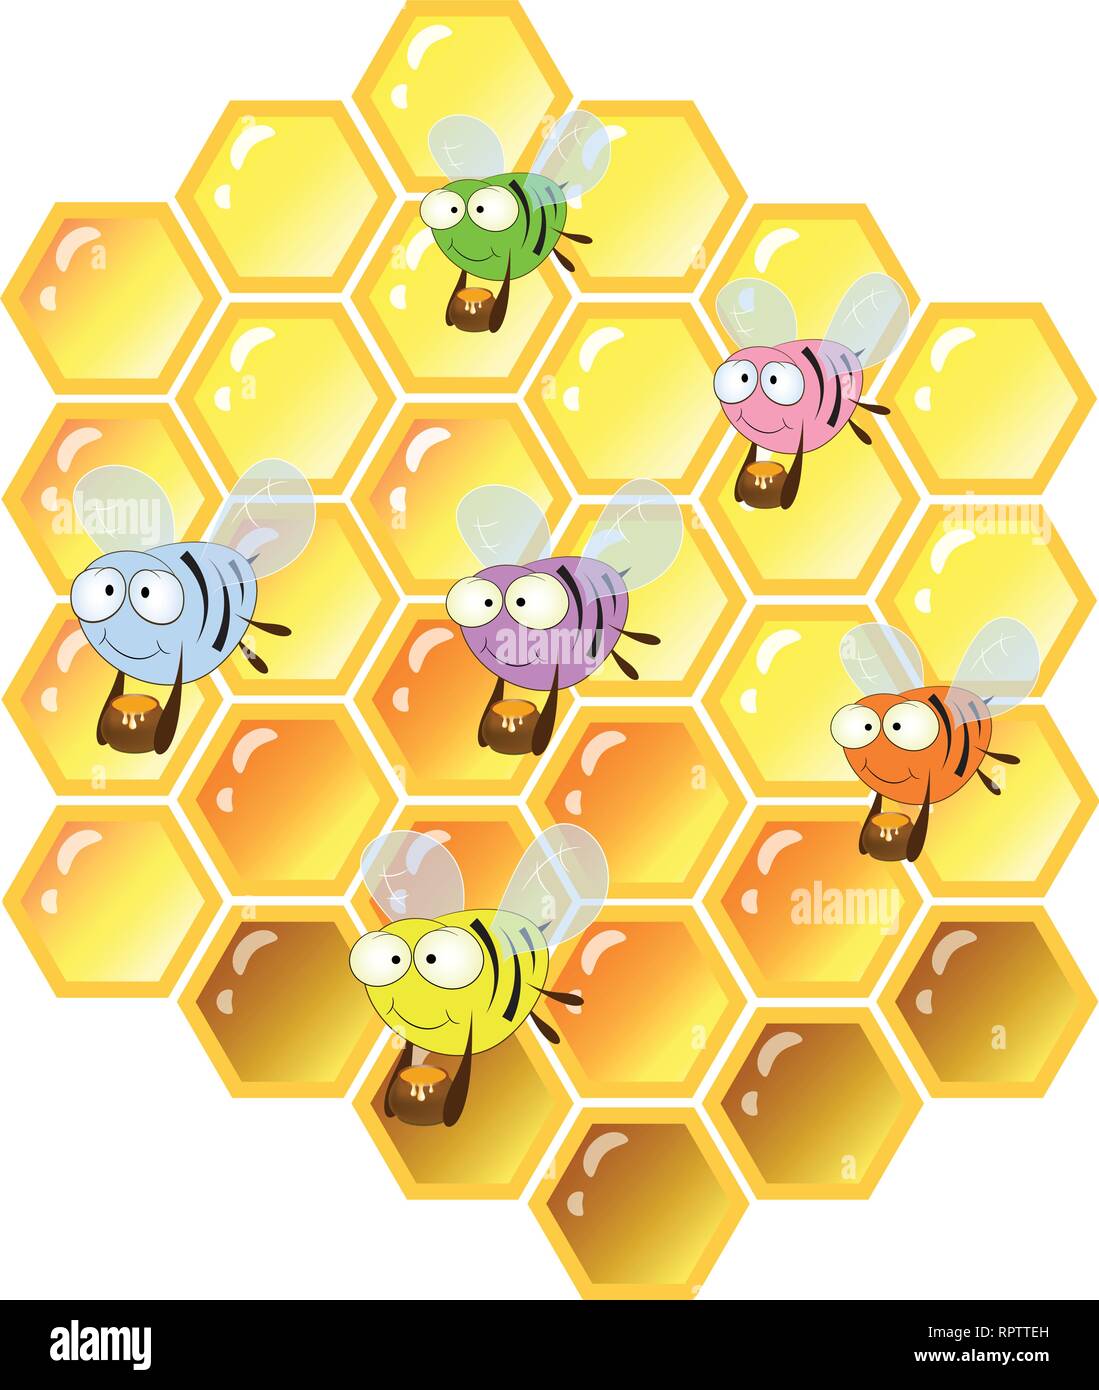 bees and honeycombs vector illustration Stock Vector